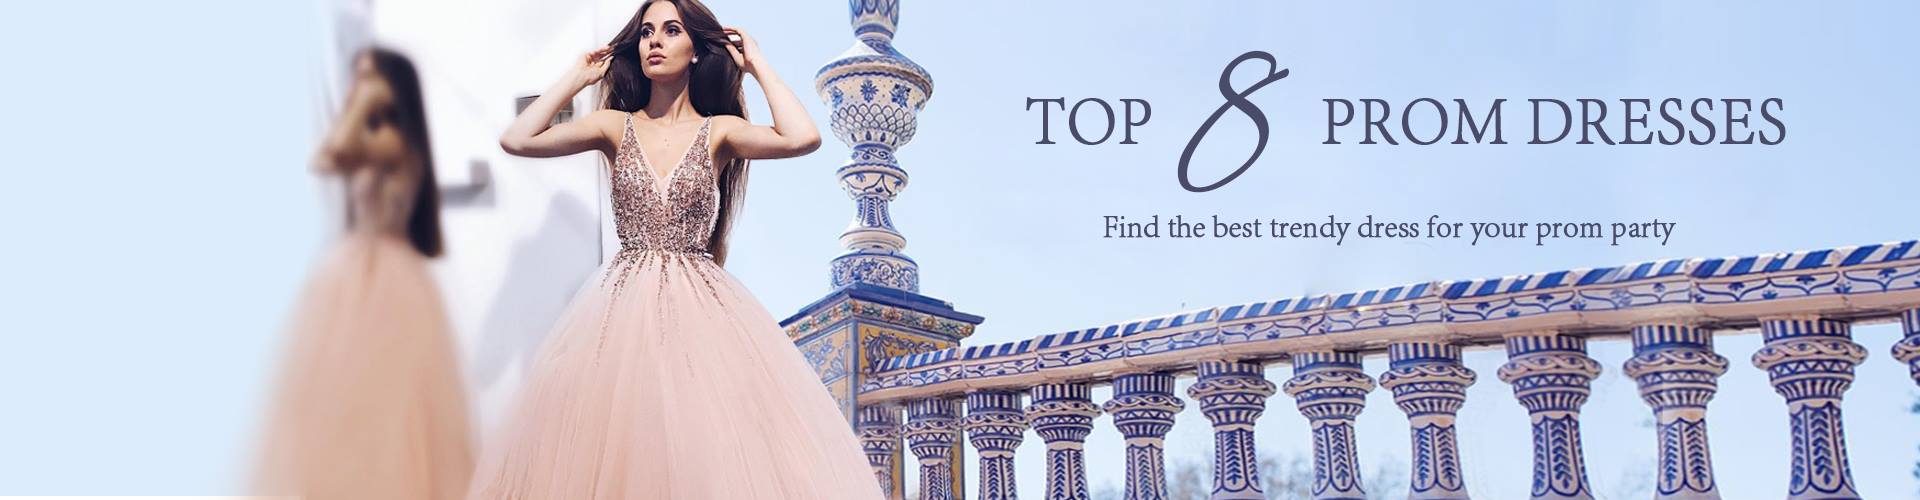 Hot selling! Up to 80% OFF on several dresses!